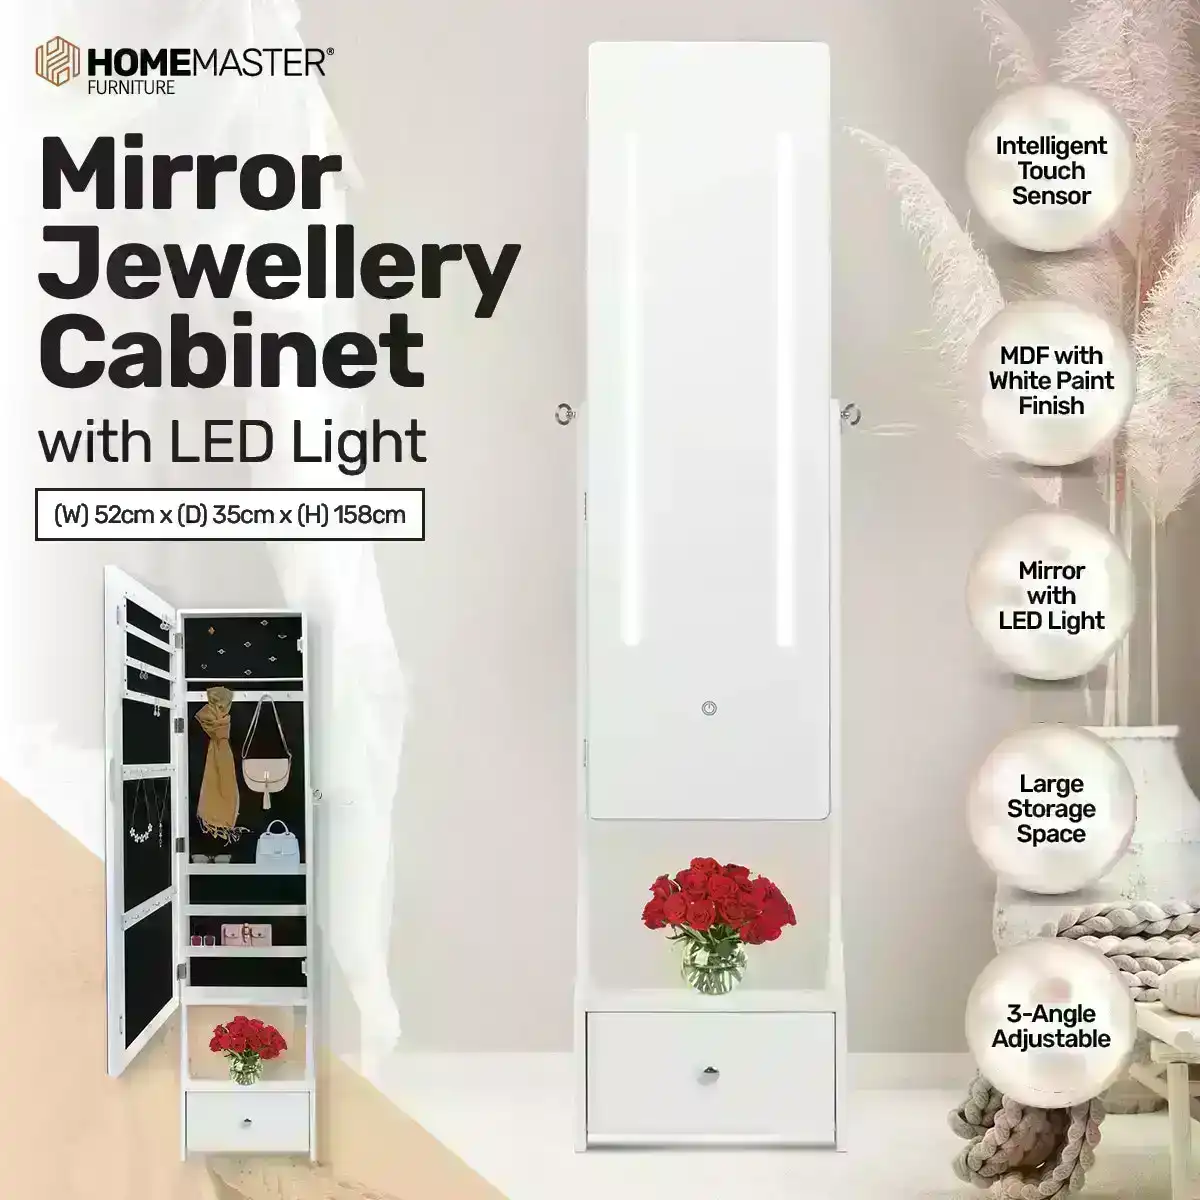 Home Master® 158cm Mirror Jewellery Cabinet LED Lighting & Adjustable Angling